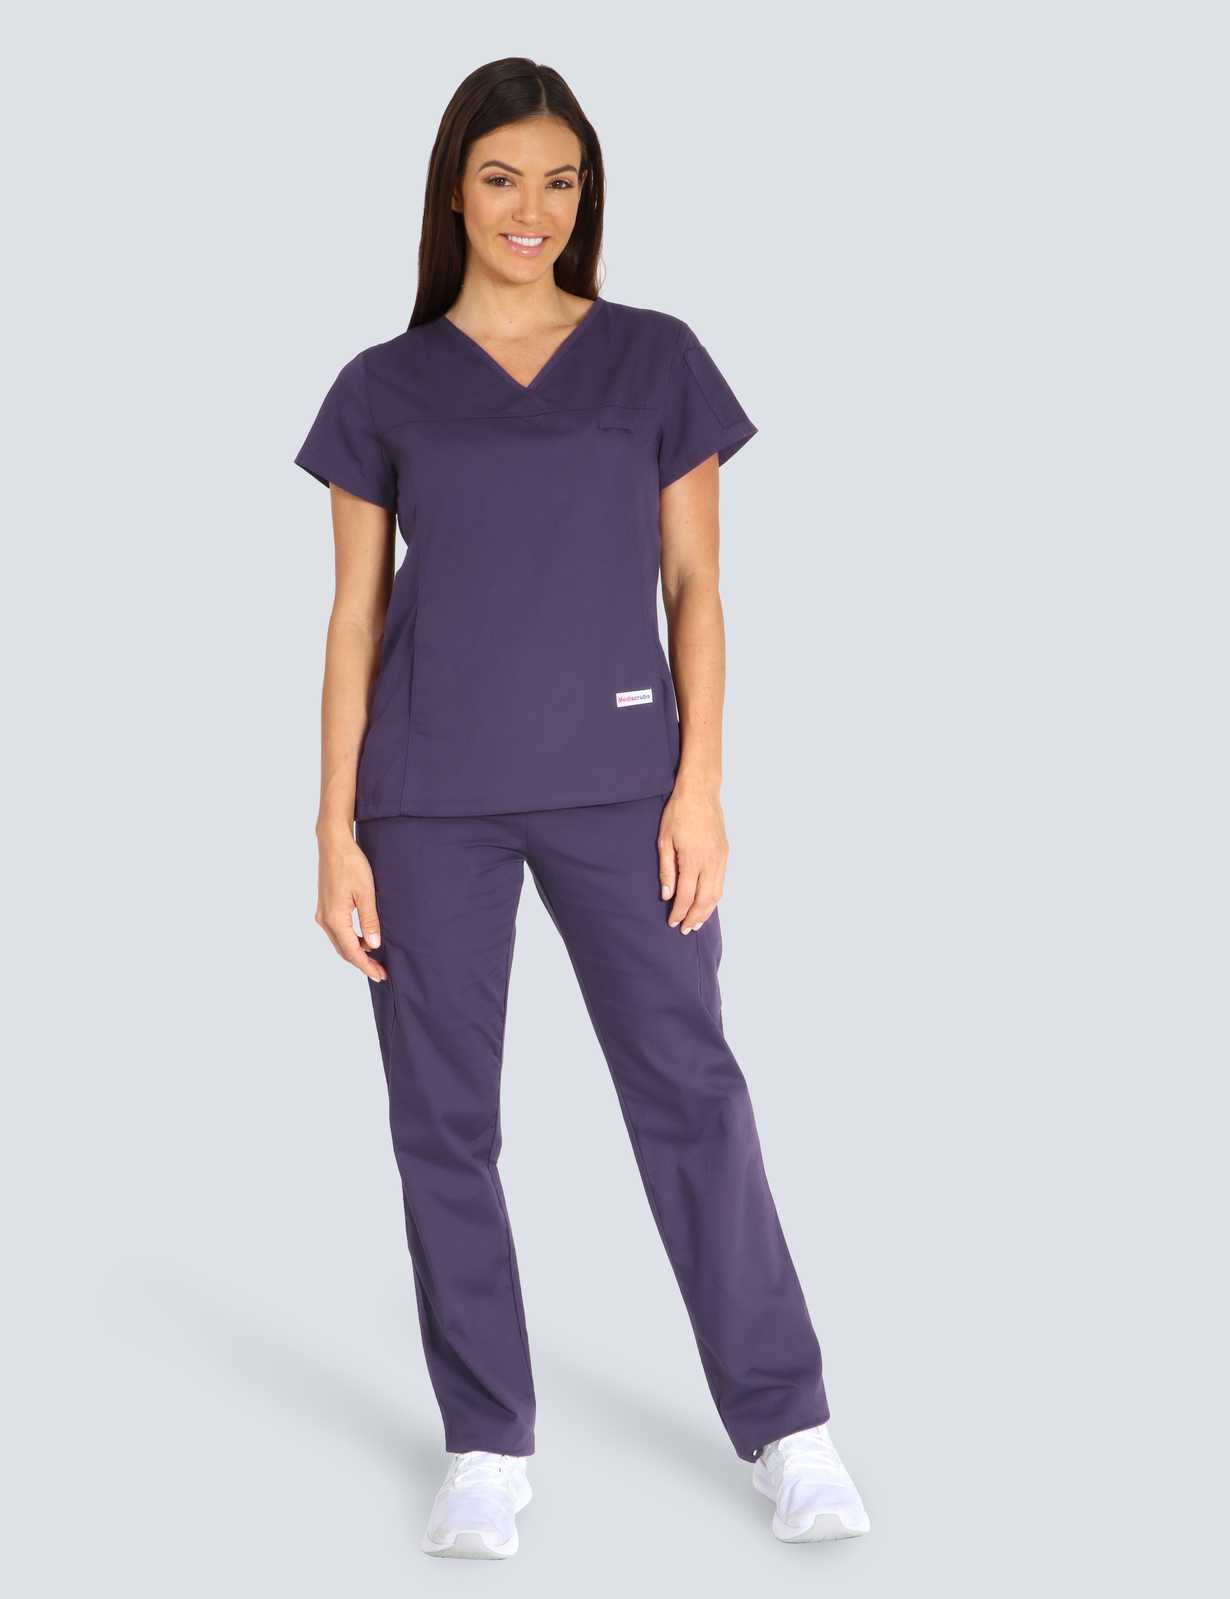 The Angliss Hospital - MI (Women's Fit Solid Scrub Top and Cargo Pants in Aubergine incl Logos)